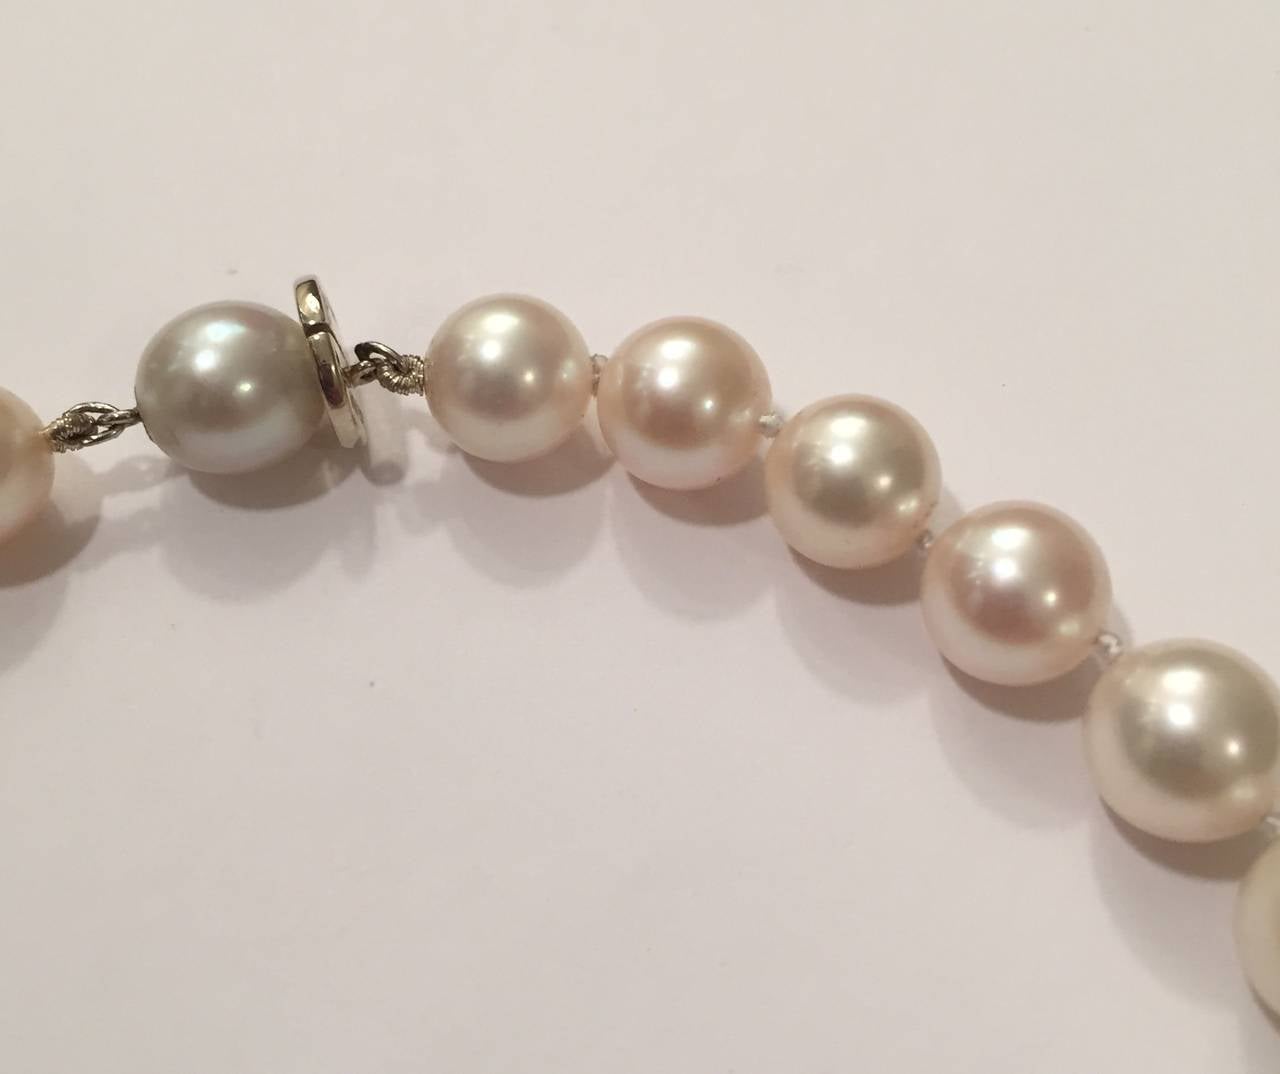 Elegant slightly graduated White Cultured Pearl Necklace with 18kt White Gold clasp.  

The cream colored pearls with beautiful luster measure 8 x 10mm and is finished at 17